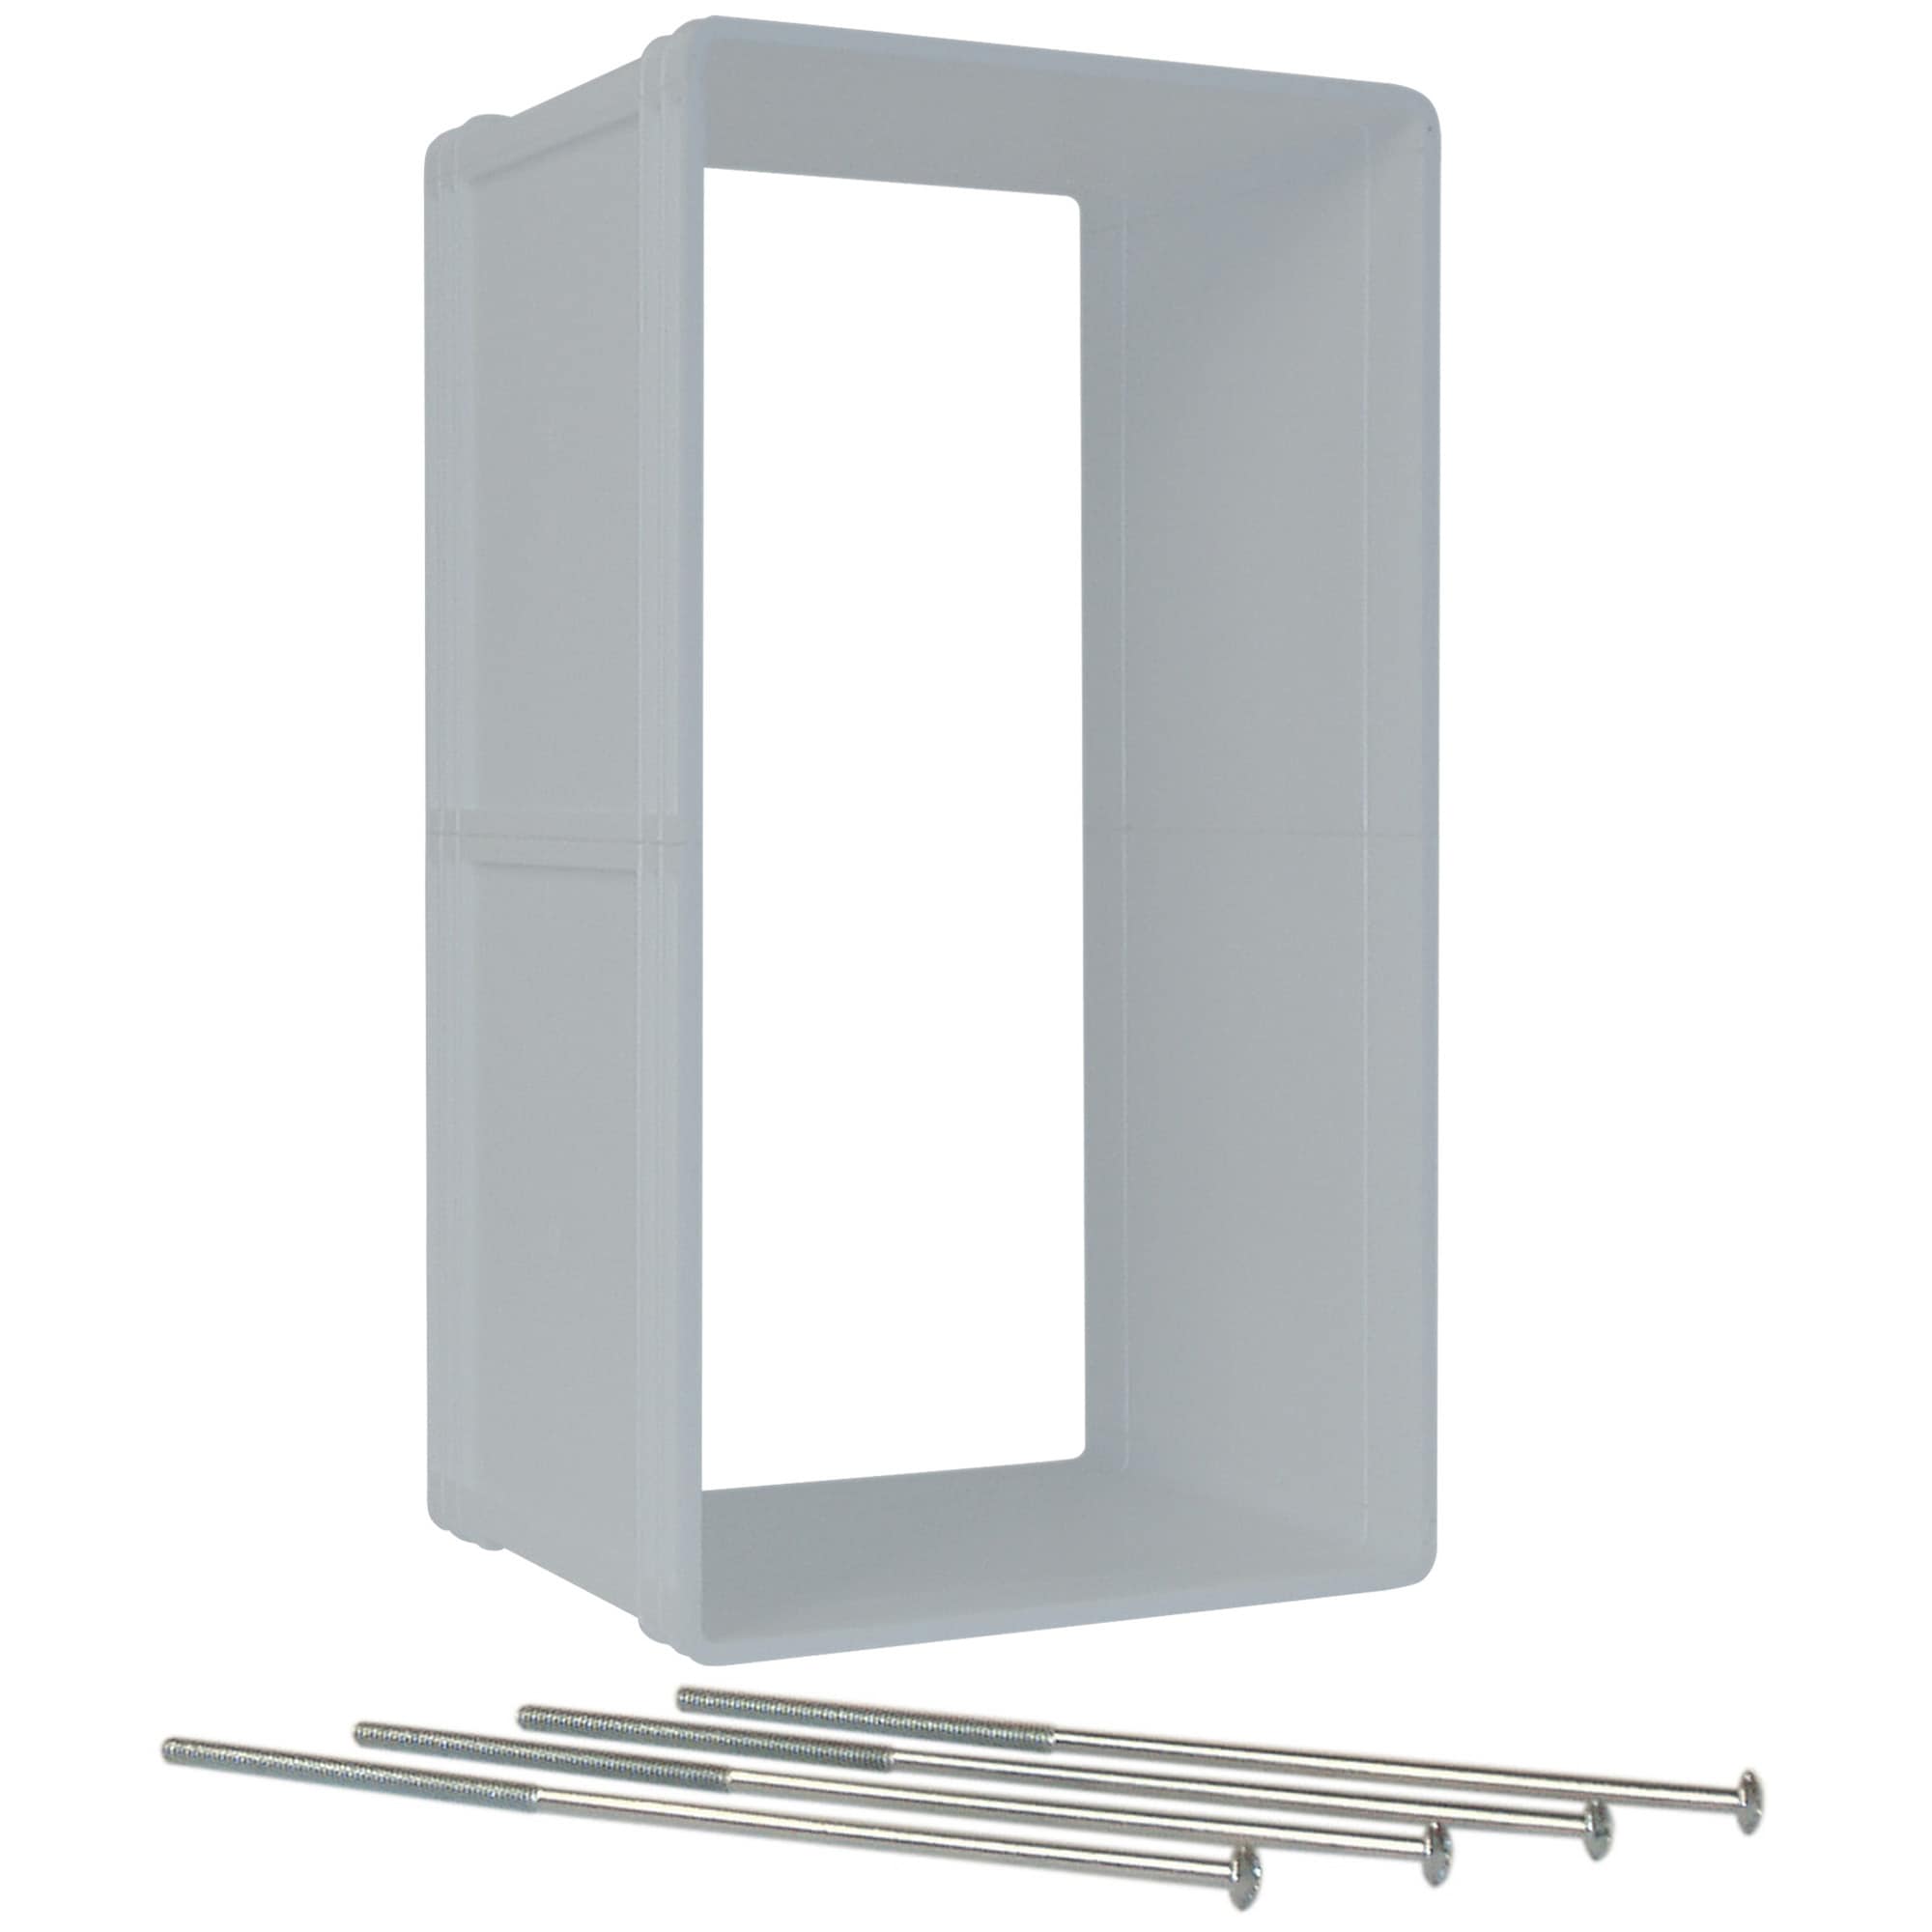 Ideal Pet Products 7 25 In X 13 In Medium 26 40 Lb Pet Door Wall Kit At Lowes Com